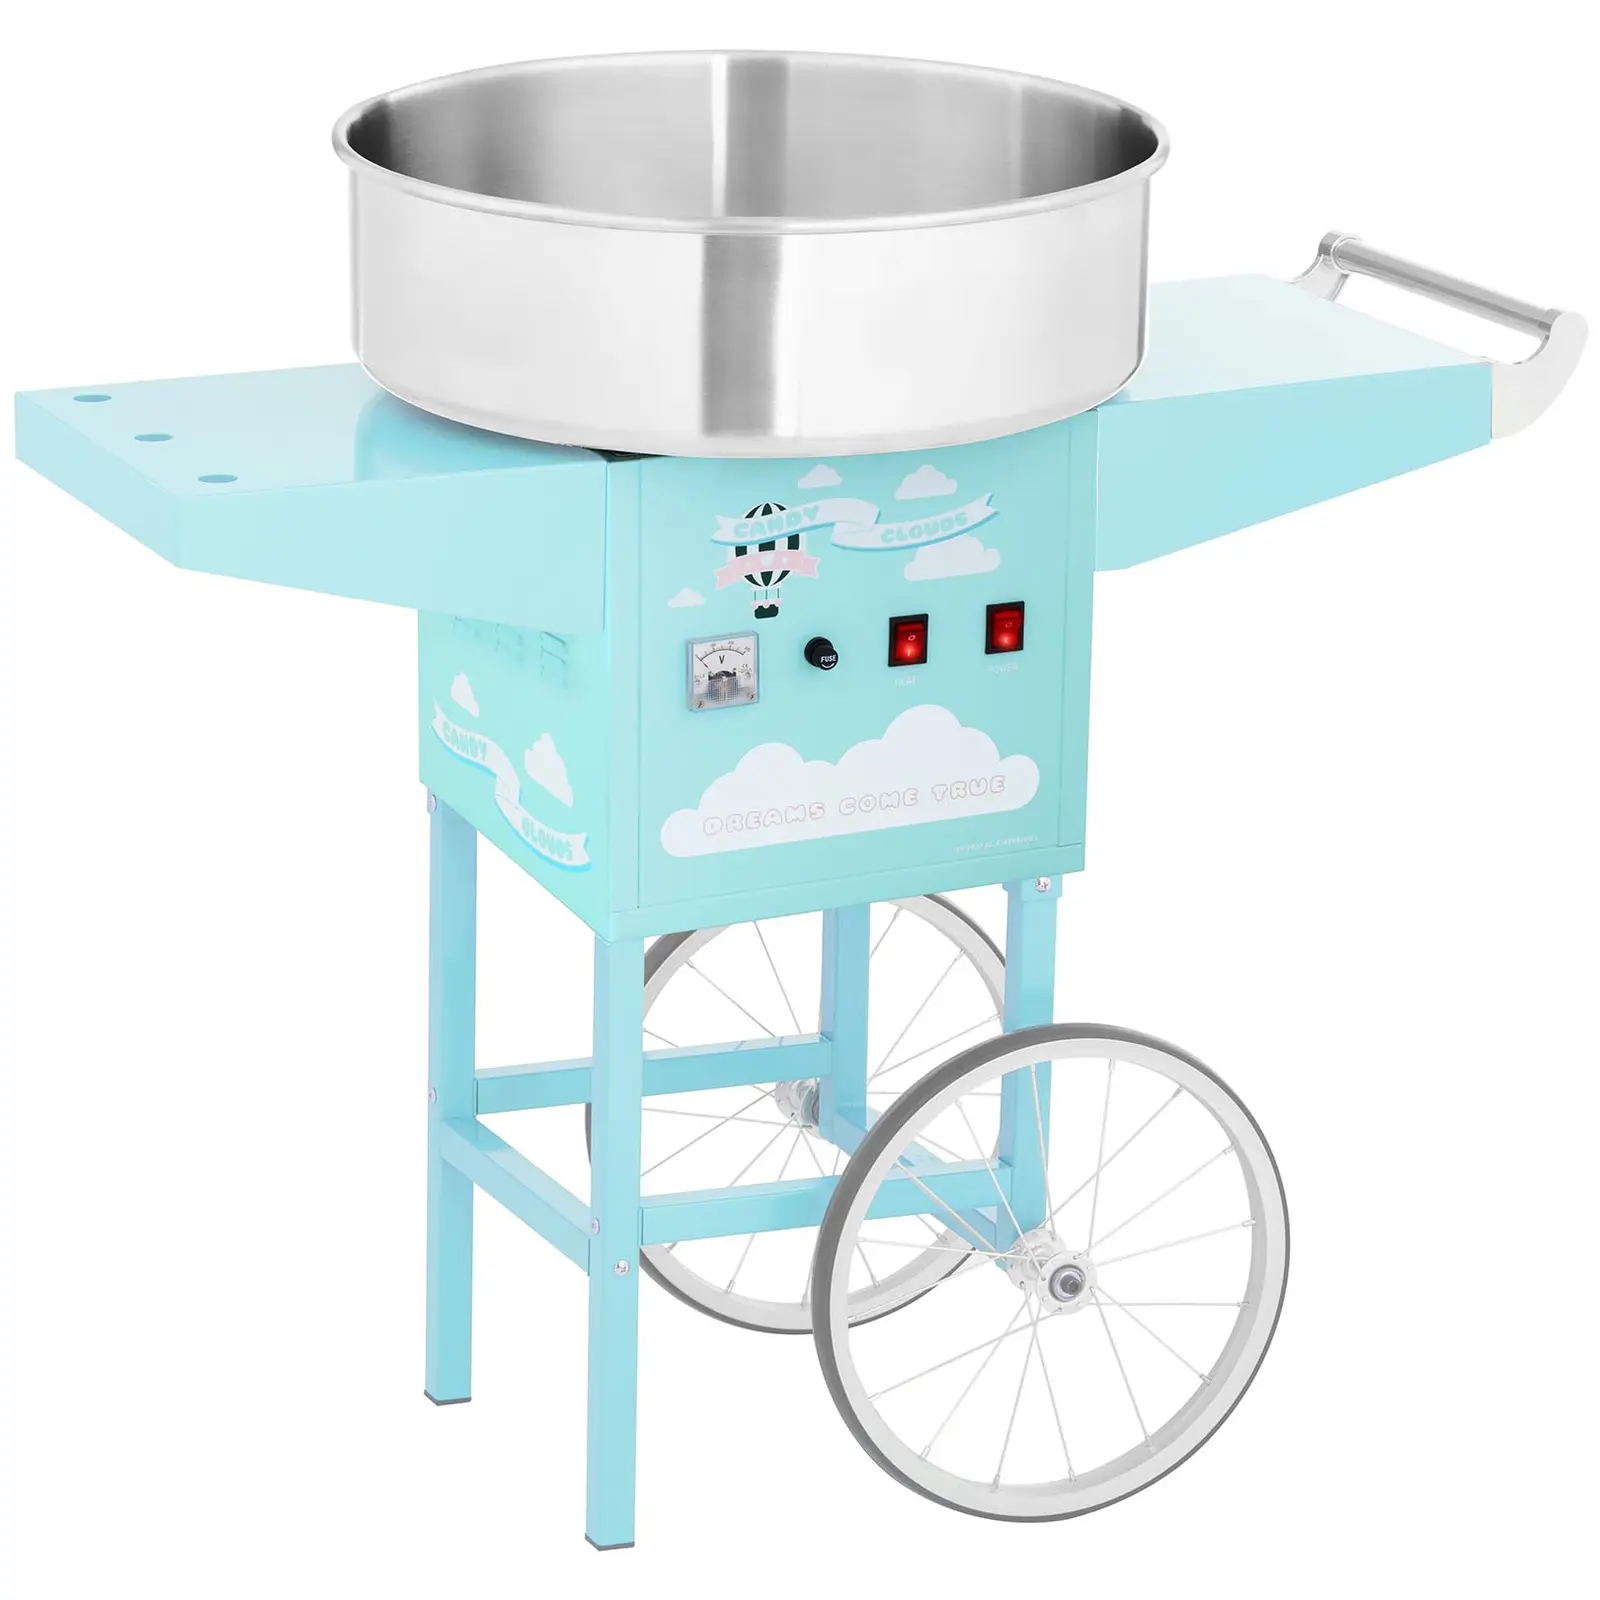 Commercial Candy Floss Machine - 52 cm - 1,200 W - Turquoise